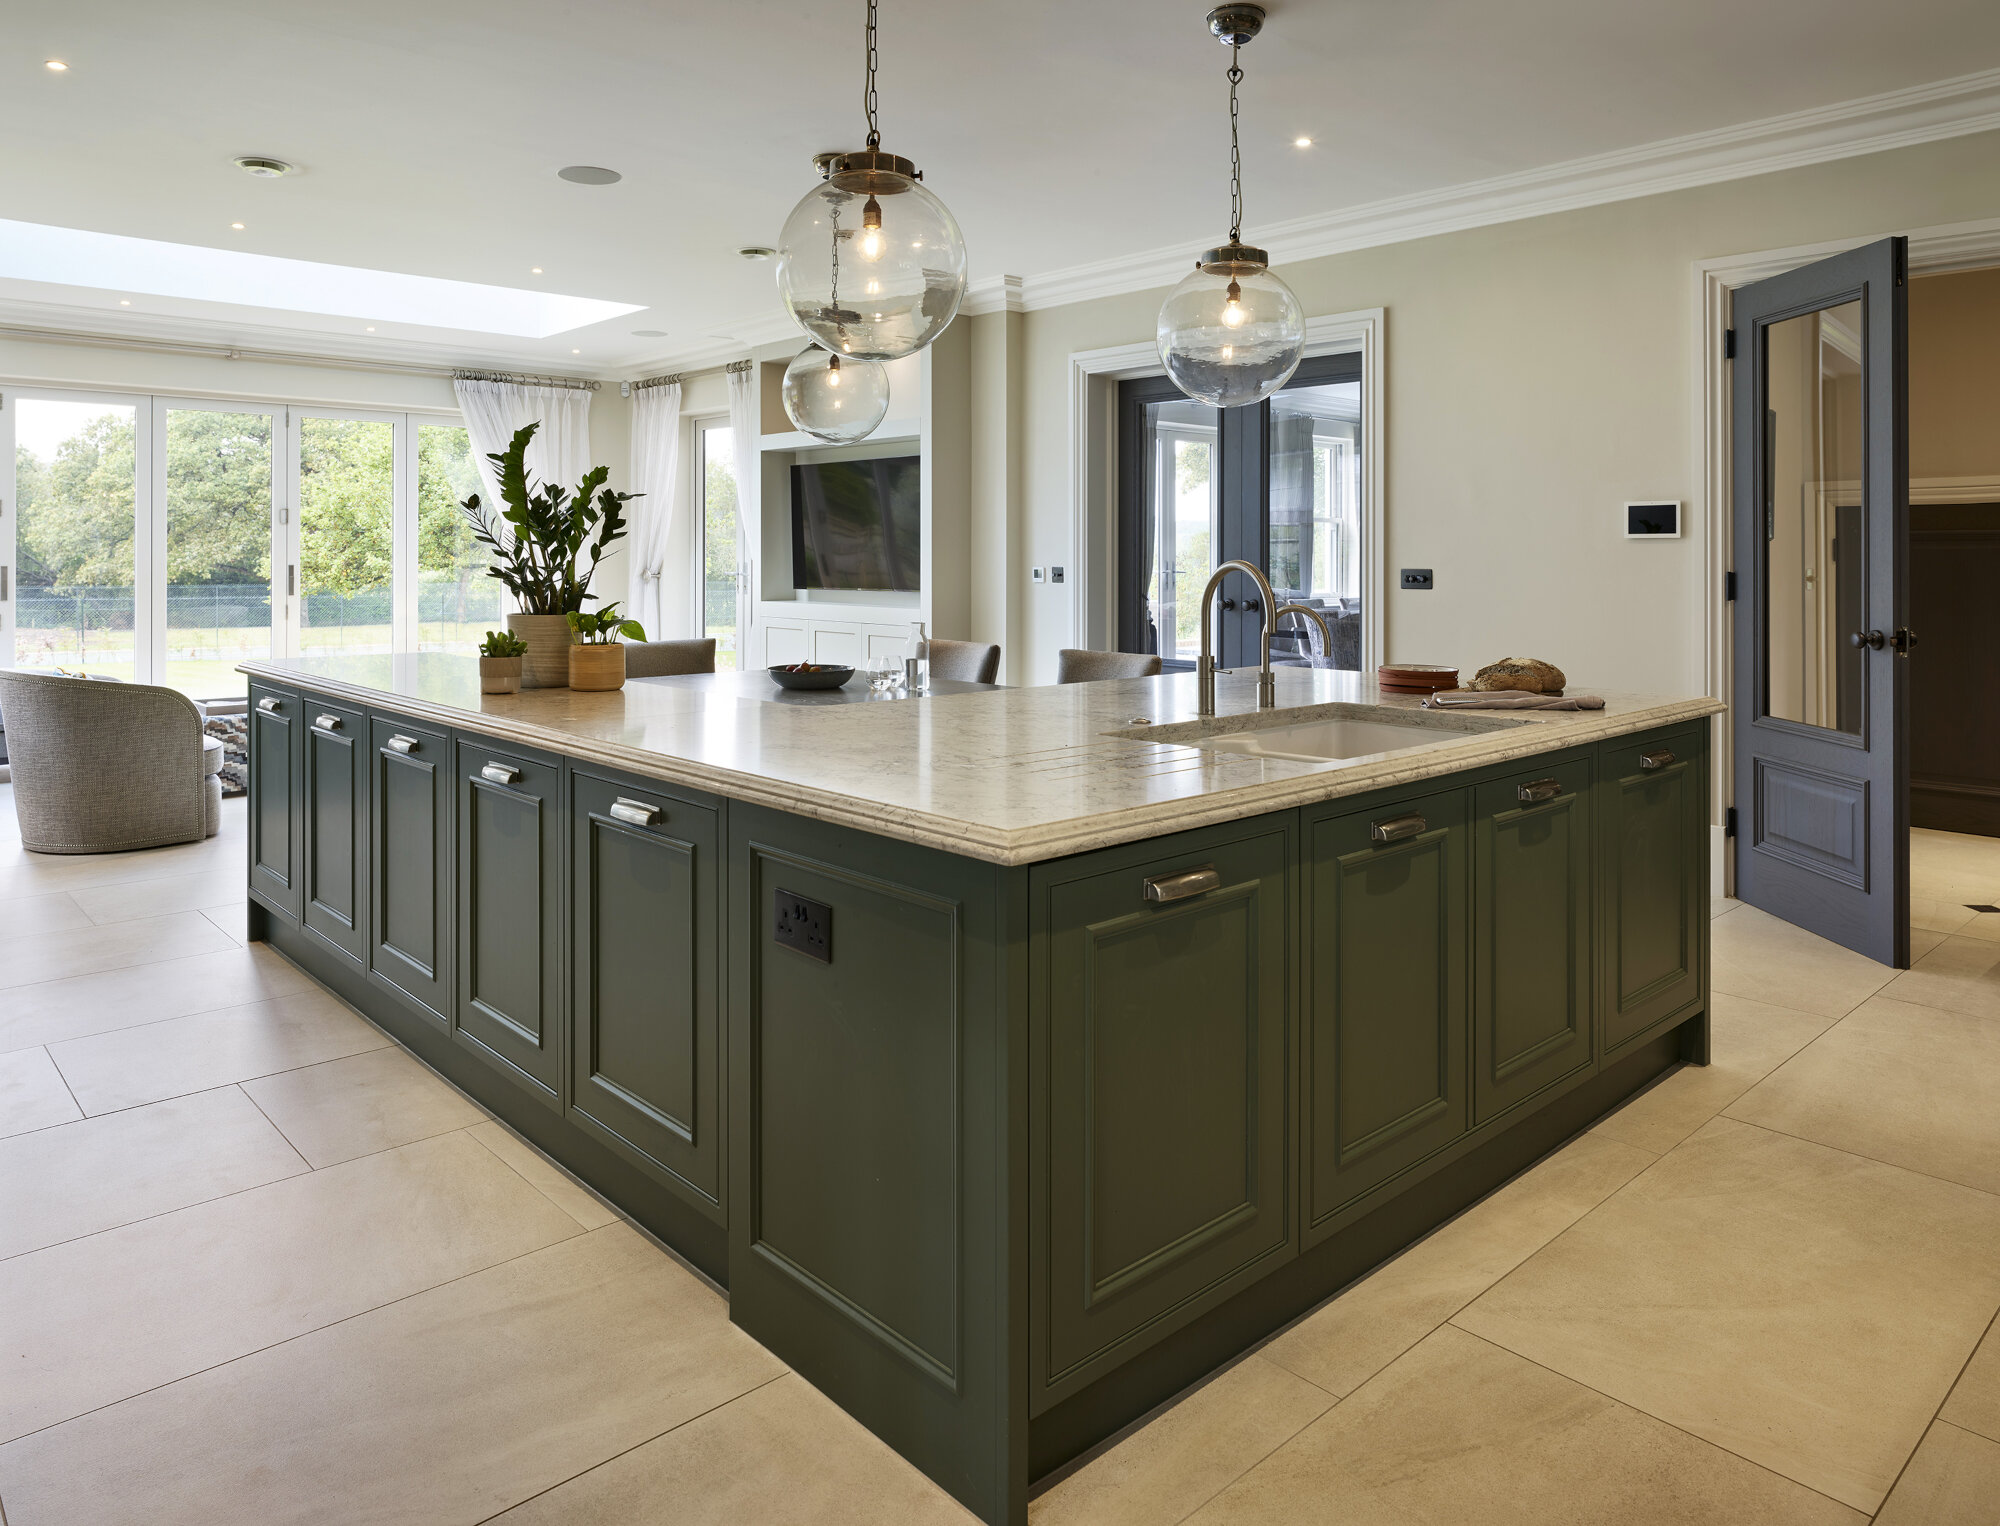 High End traditional Kitchens In Heanor